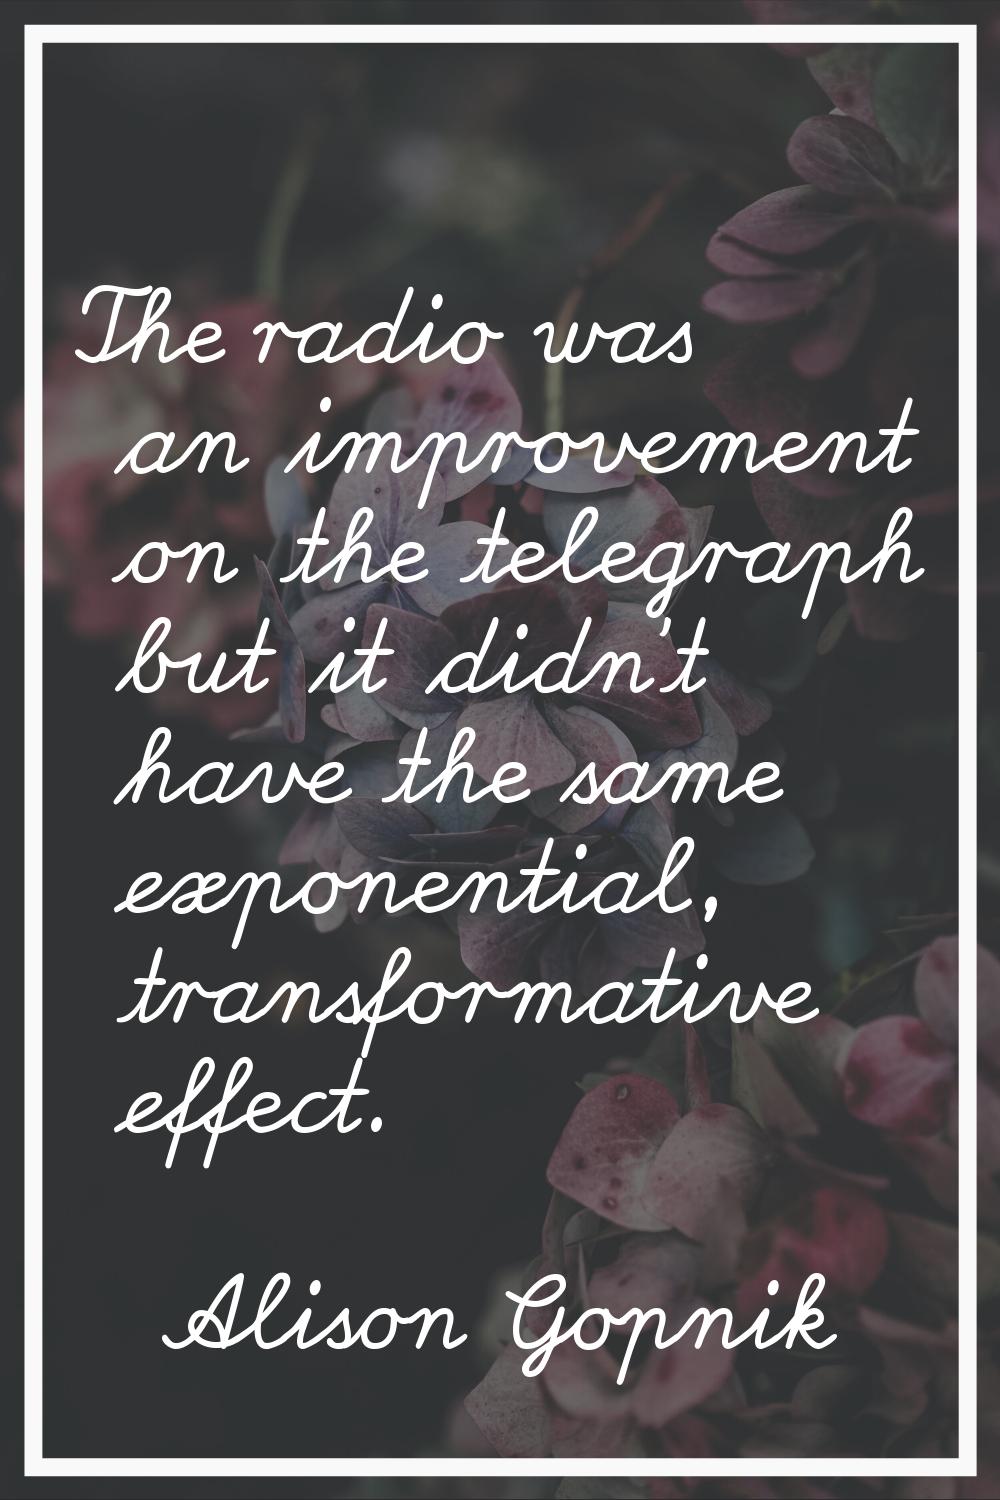 The radio was an improvement on the telegraph but it didn't have the same exponential, transformati